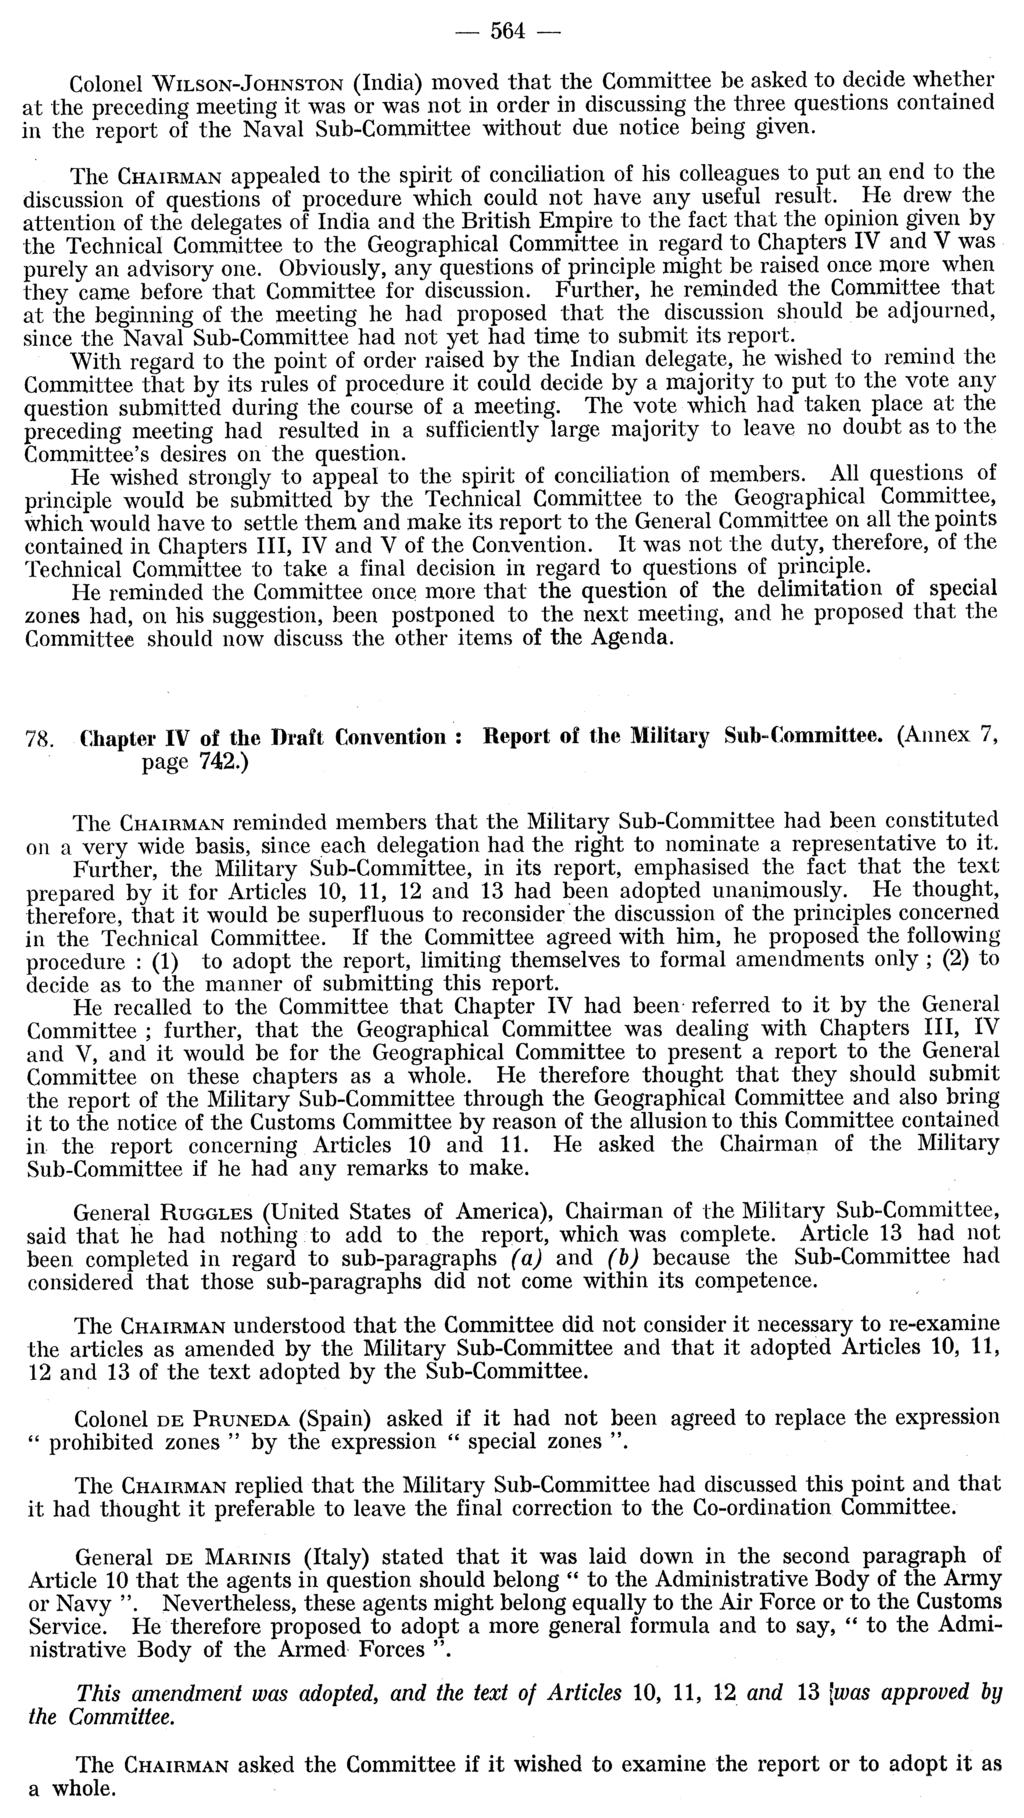 564 Colonel WILSON-JOHNSTON (India) moved that the Committee be asked to decide whether at the preceding meeting it was or was not in order in discussing the three questions contained in the report